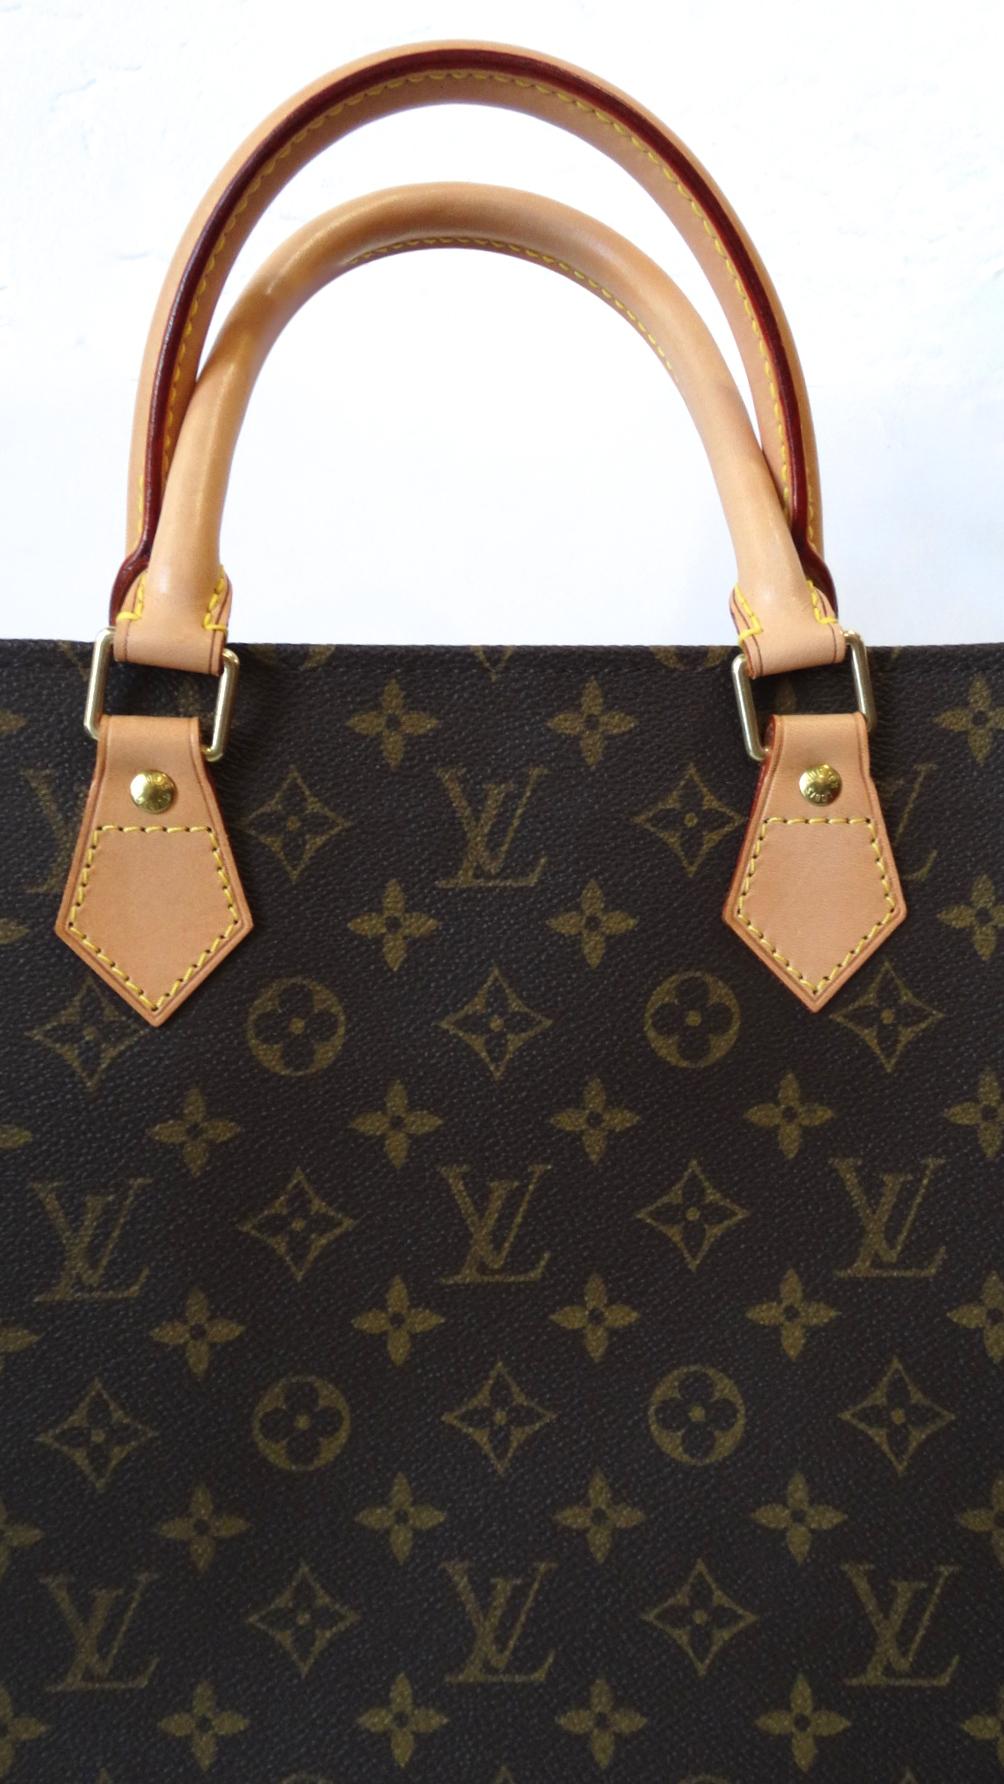 Amazing 2000s Louis Vuitton Sac Plat in none other than the brown Monogram print! This style is no longer available at Louis Vuitton, making this a rare and fun classic to add to your collection! In fantastic condition, with no signs of patina on